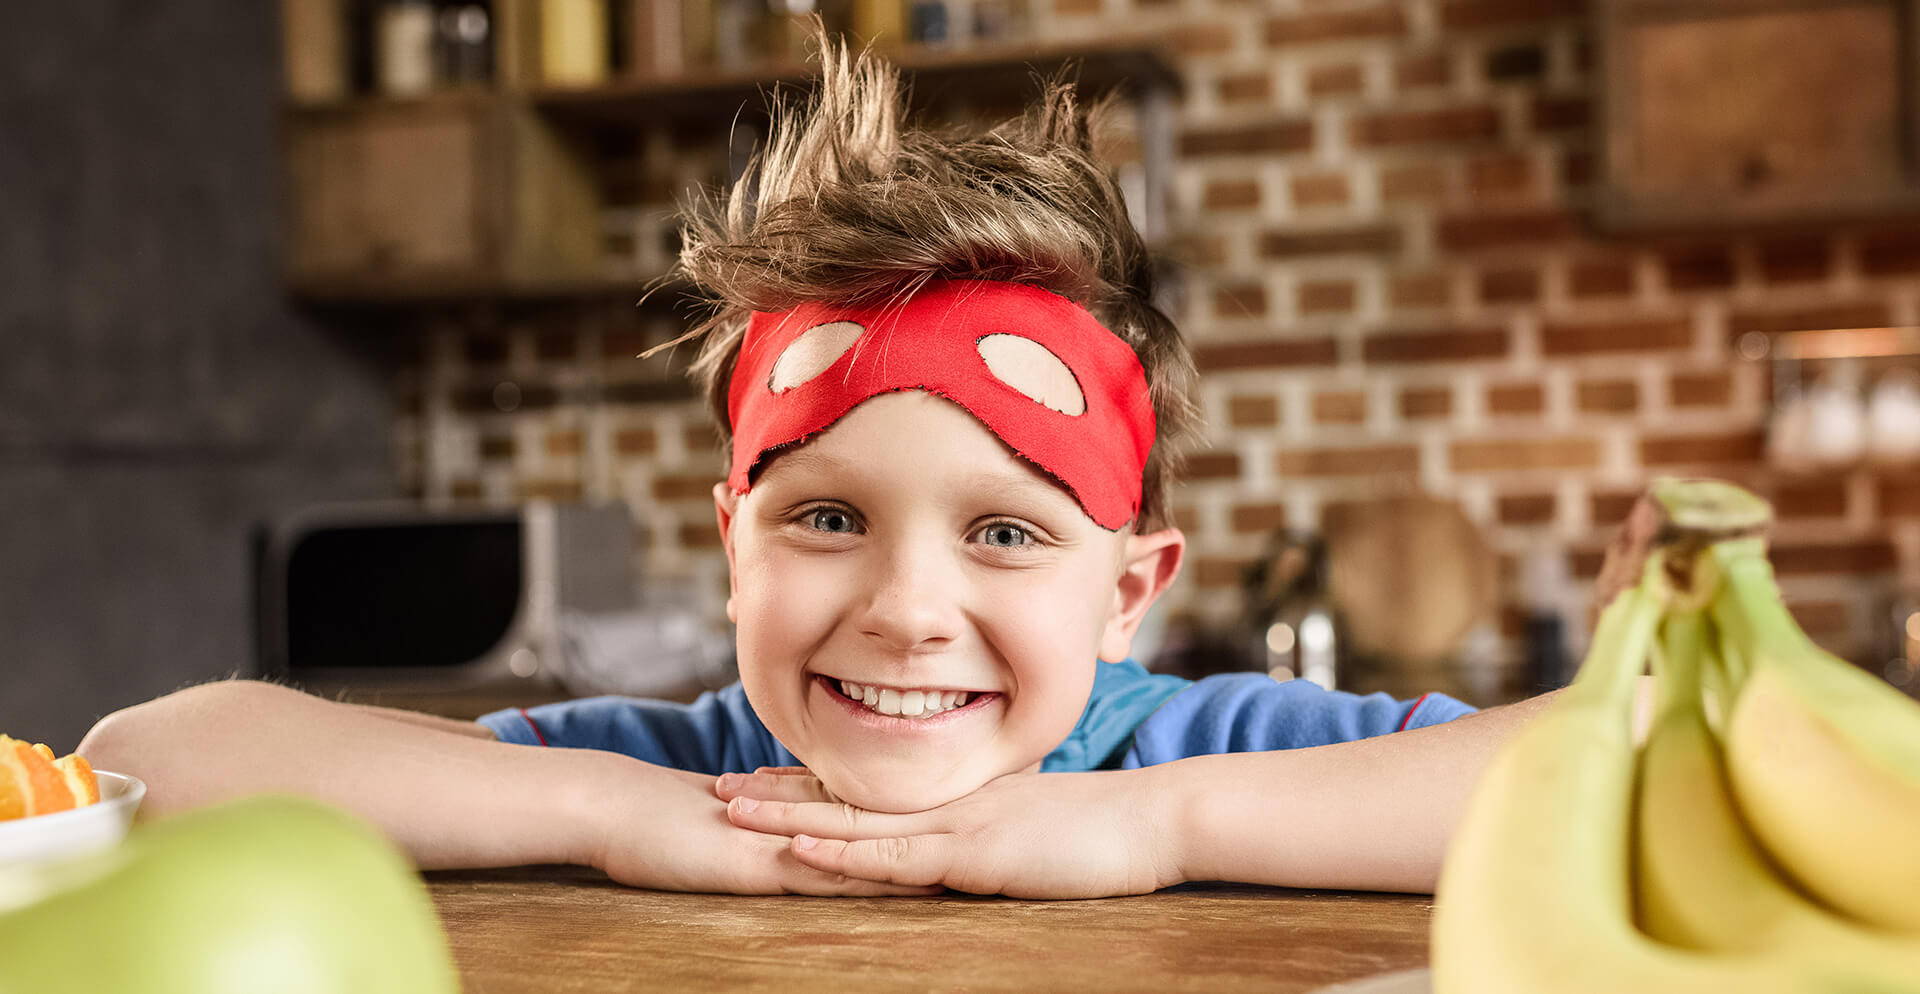 Image Of Kid With Super Hero Mask On